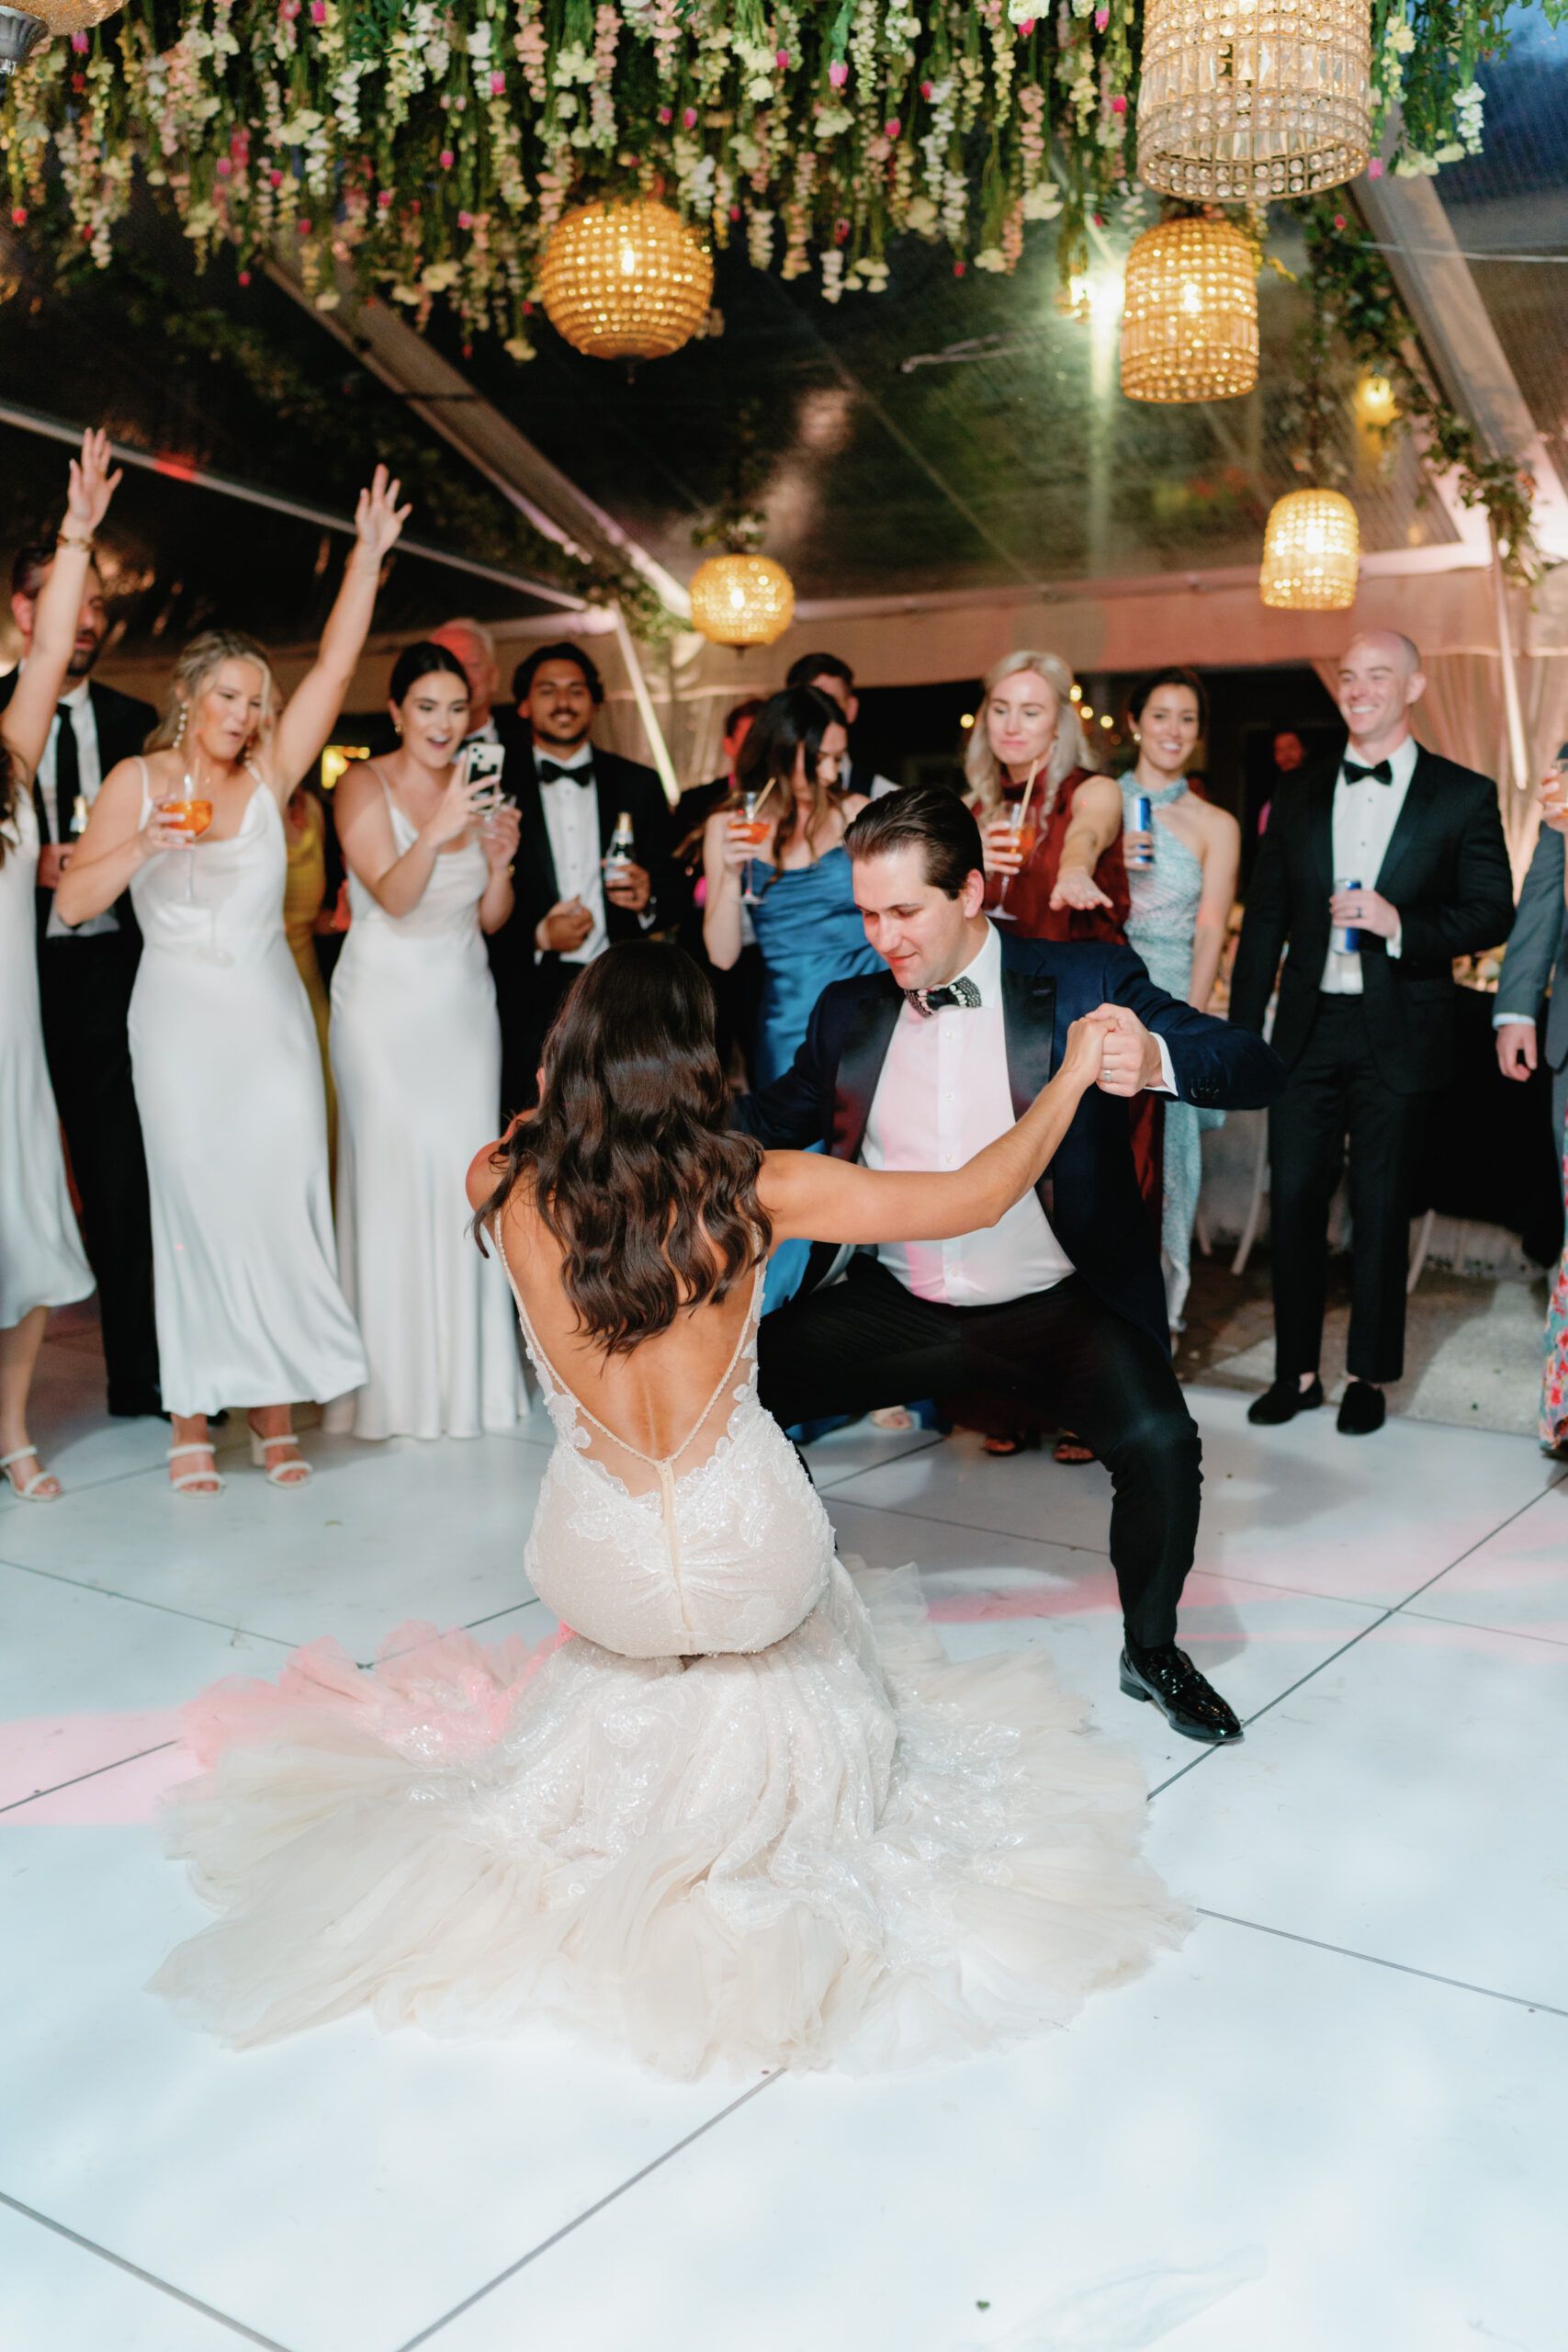 Bride and groom take over the dance floor.